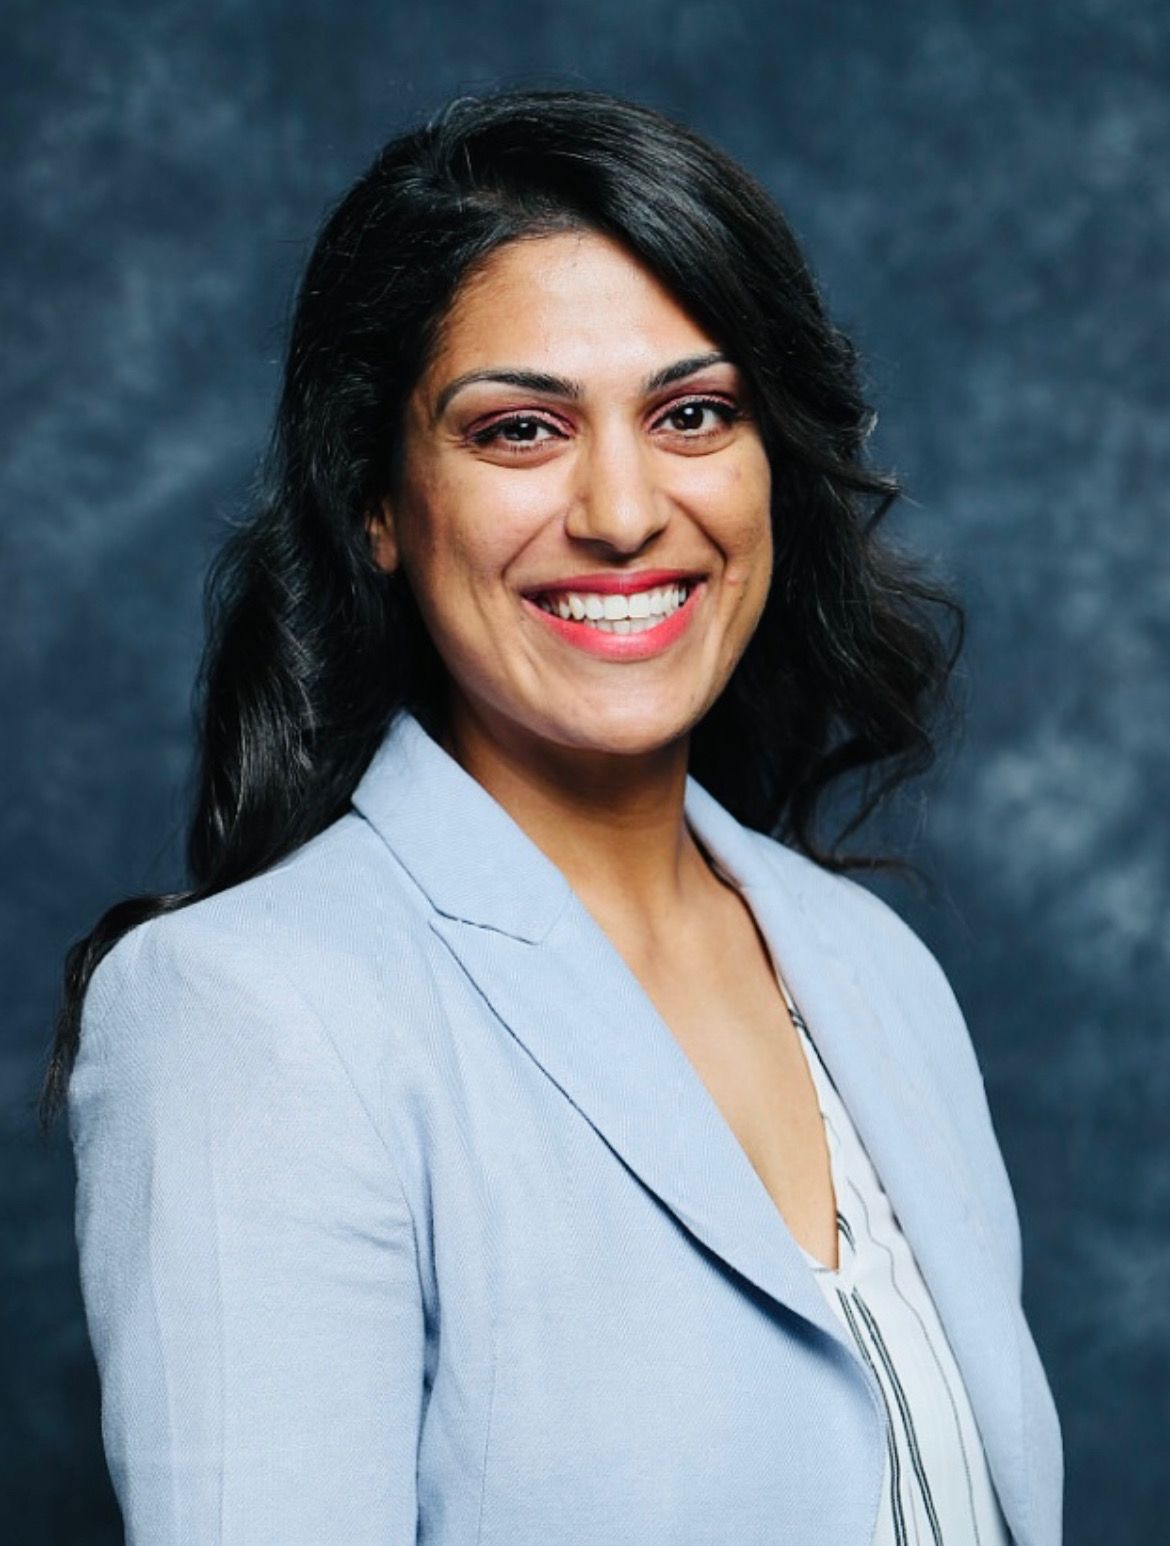 Dr. Kataria was featured in Women in Optometry